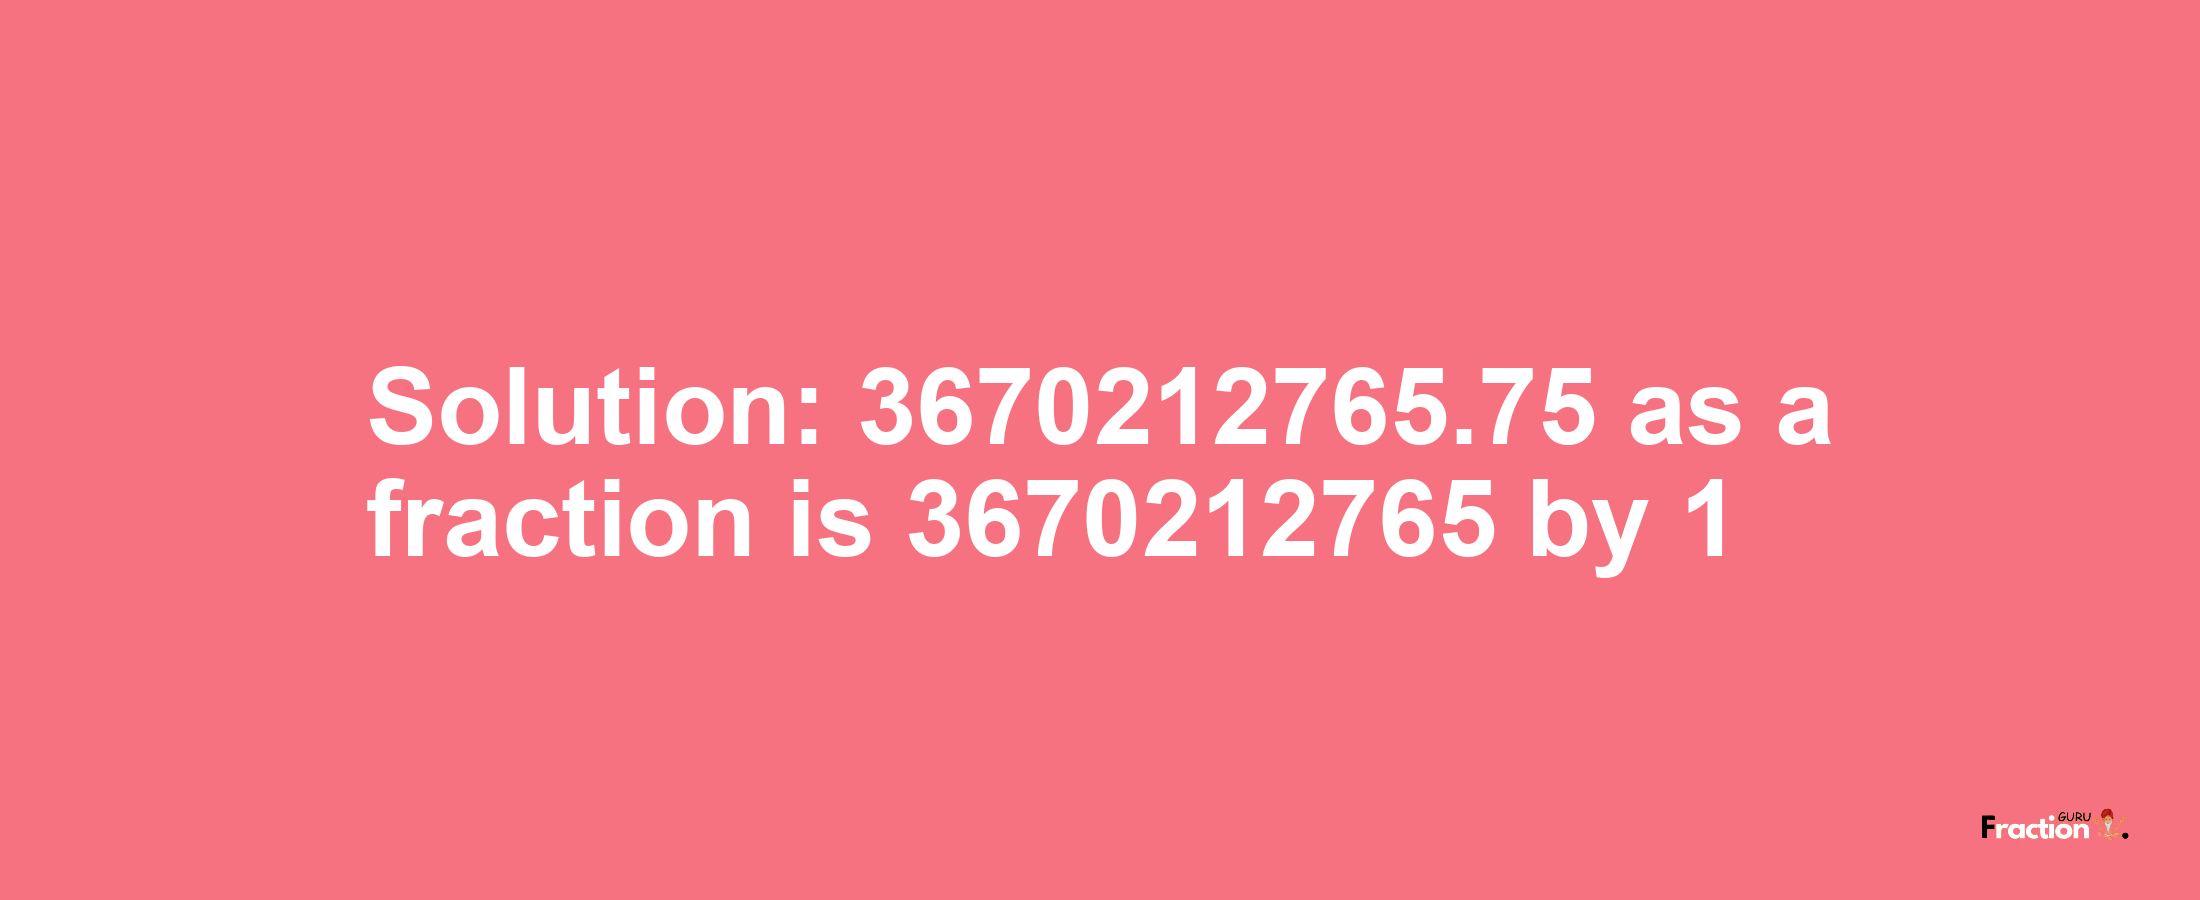 Solution:3670212765.75 as a fraction is 3670212765/1